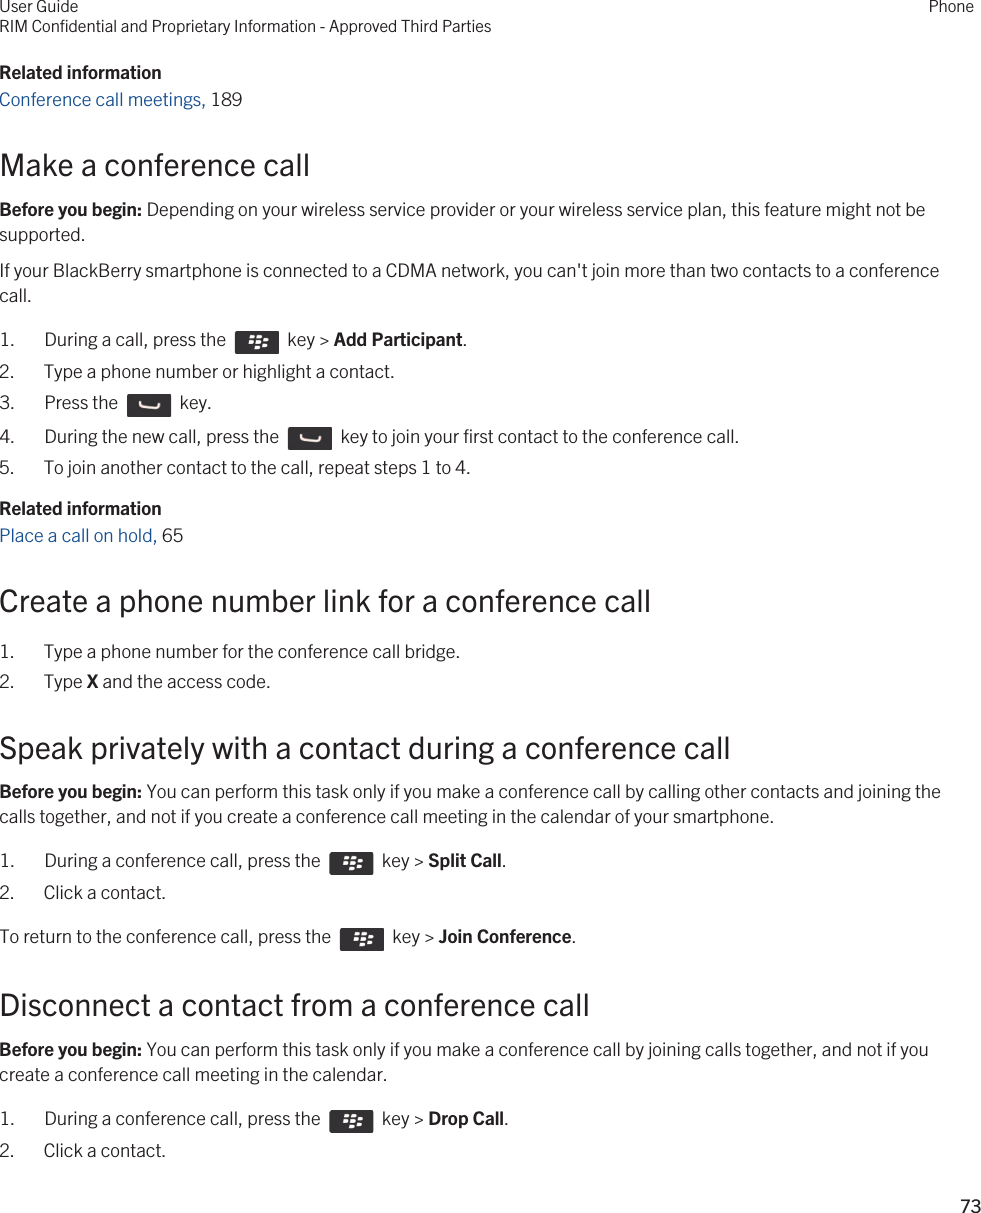 Related informationConference call meetings, 189Make a conference callBefore you begin: Depending on your wireless service provider or your wireless service plan, this feature might not be supported.If your BlackBerry smartphone is connected to a CDMA network, you can&apos;t join more than two contacts to a conference call.1.  During a call, press the    key &gt; Add Participant.2. Type a phone number or highlight a contact.3.  Press the    key. 4.  During the new call, press the    key to join your first contact to the conference call. 5. To join another contact to the call, repeat steps 1 to 4.Related informationPlace a call on hold, 65 Create a phone number link for a conference call1. Type a phone number for the conference call bridge.2. Type X and the access code.Speak privately with a contact during a conference callBefore you begin: You can perform this task only if you make a conference call by calling other contacts and joining the calls together, and not if you create a conference call meeting in the calendar of your smartphone.1.  During a conference call, press the    key &gt; Split Call.2. Click a contact.To return to the conference call, press the    key &gt; Join Conference.Disconnect a contact from a conference callBefore you begin: You can perform this task only if you make a conference call by joining calls together, and not if you create a conference call meeting in the calendar.1.  During a conference call, press the    key &gt; Drop Call.2. Click a contact.User GuideRIM Confidential and Proprietary Information - Approved Third PartiesPhone73 